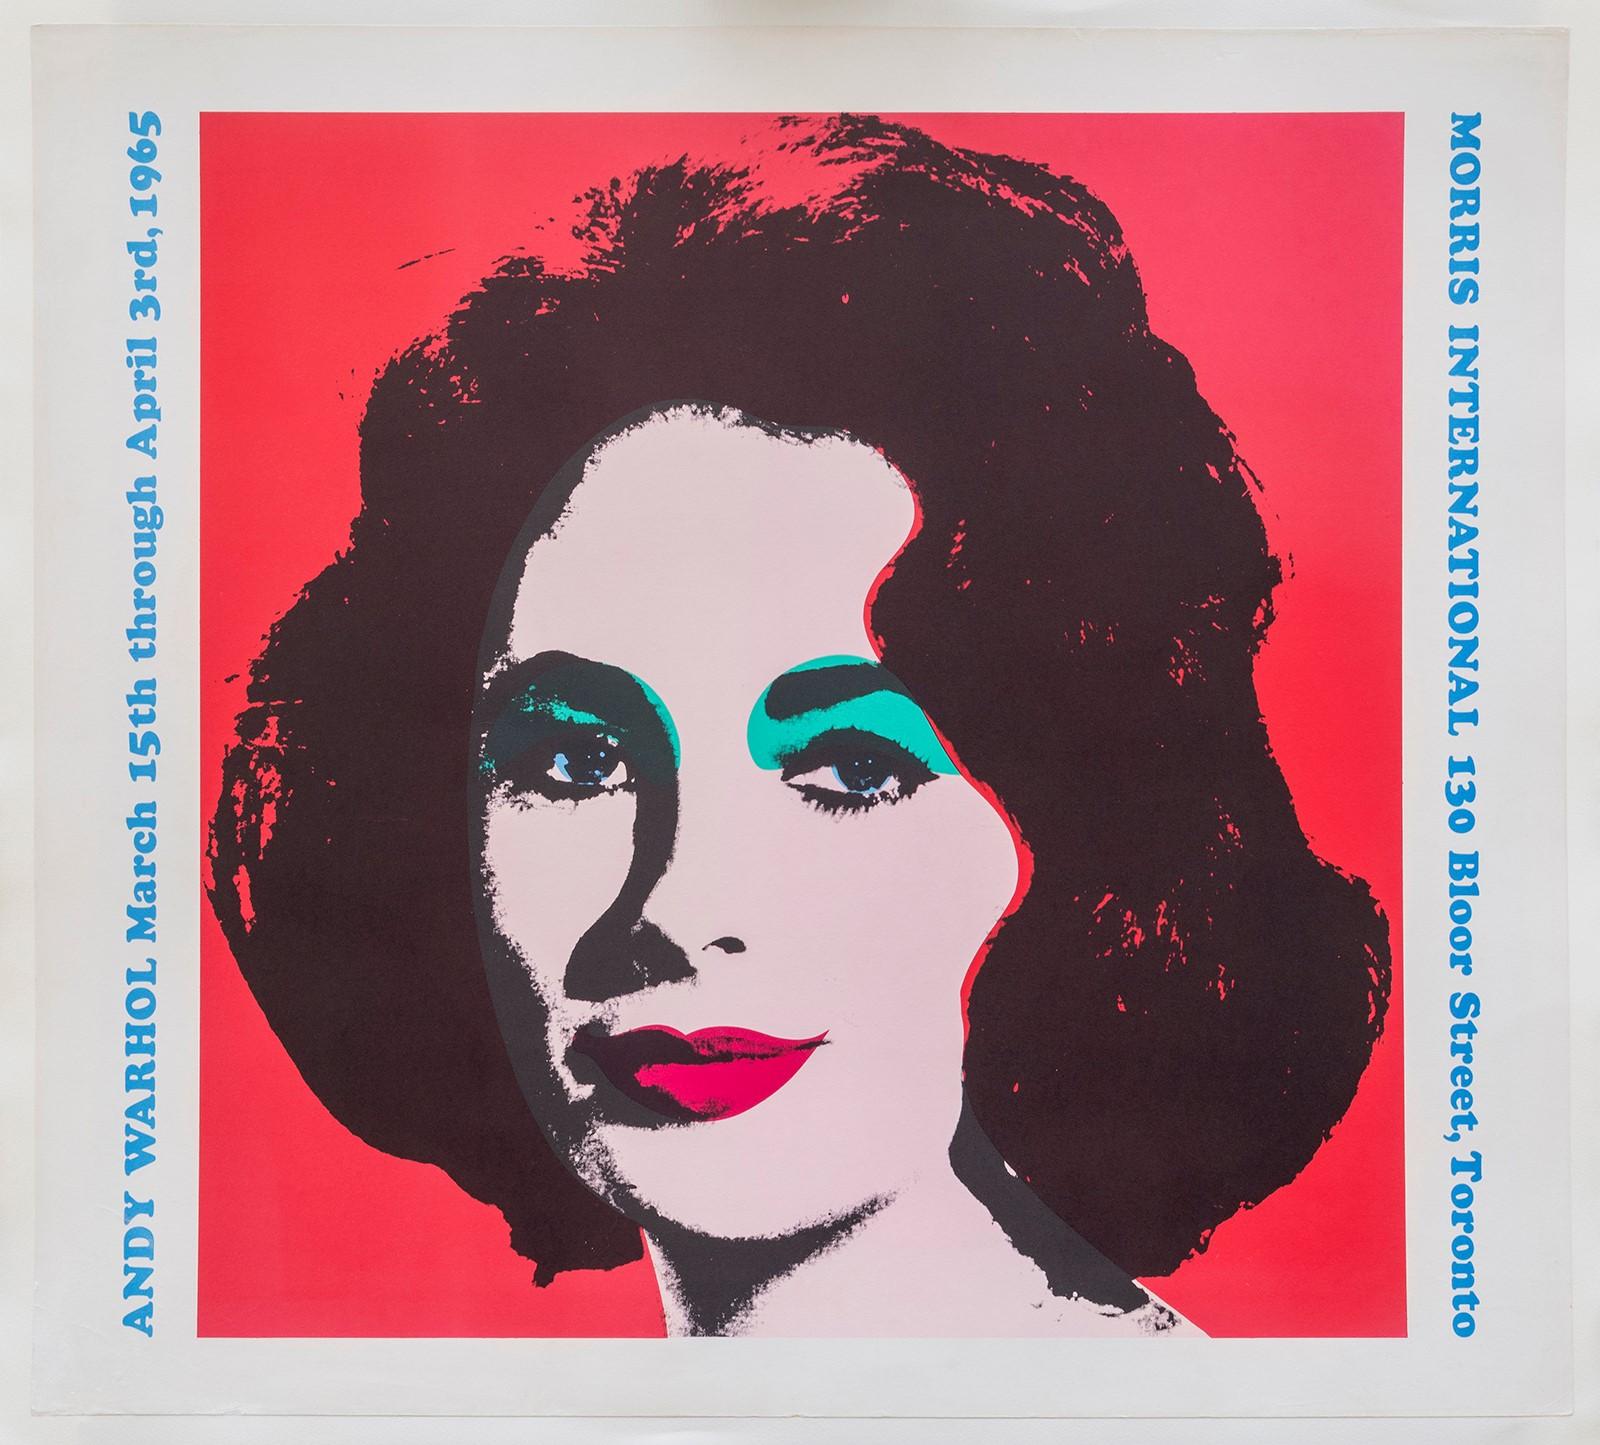 An original offset-lithograph exhibition poster on heavy wove paper after American artist Andy Warhol (1928-1987) titled “Morris International (Liz Taylor)”, 1965. Edition size unknown, presumed small.
Produced for Warhol’s first exhibition of work